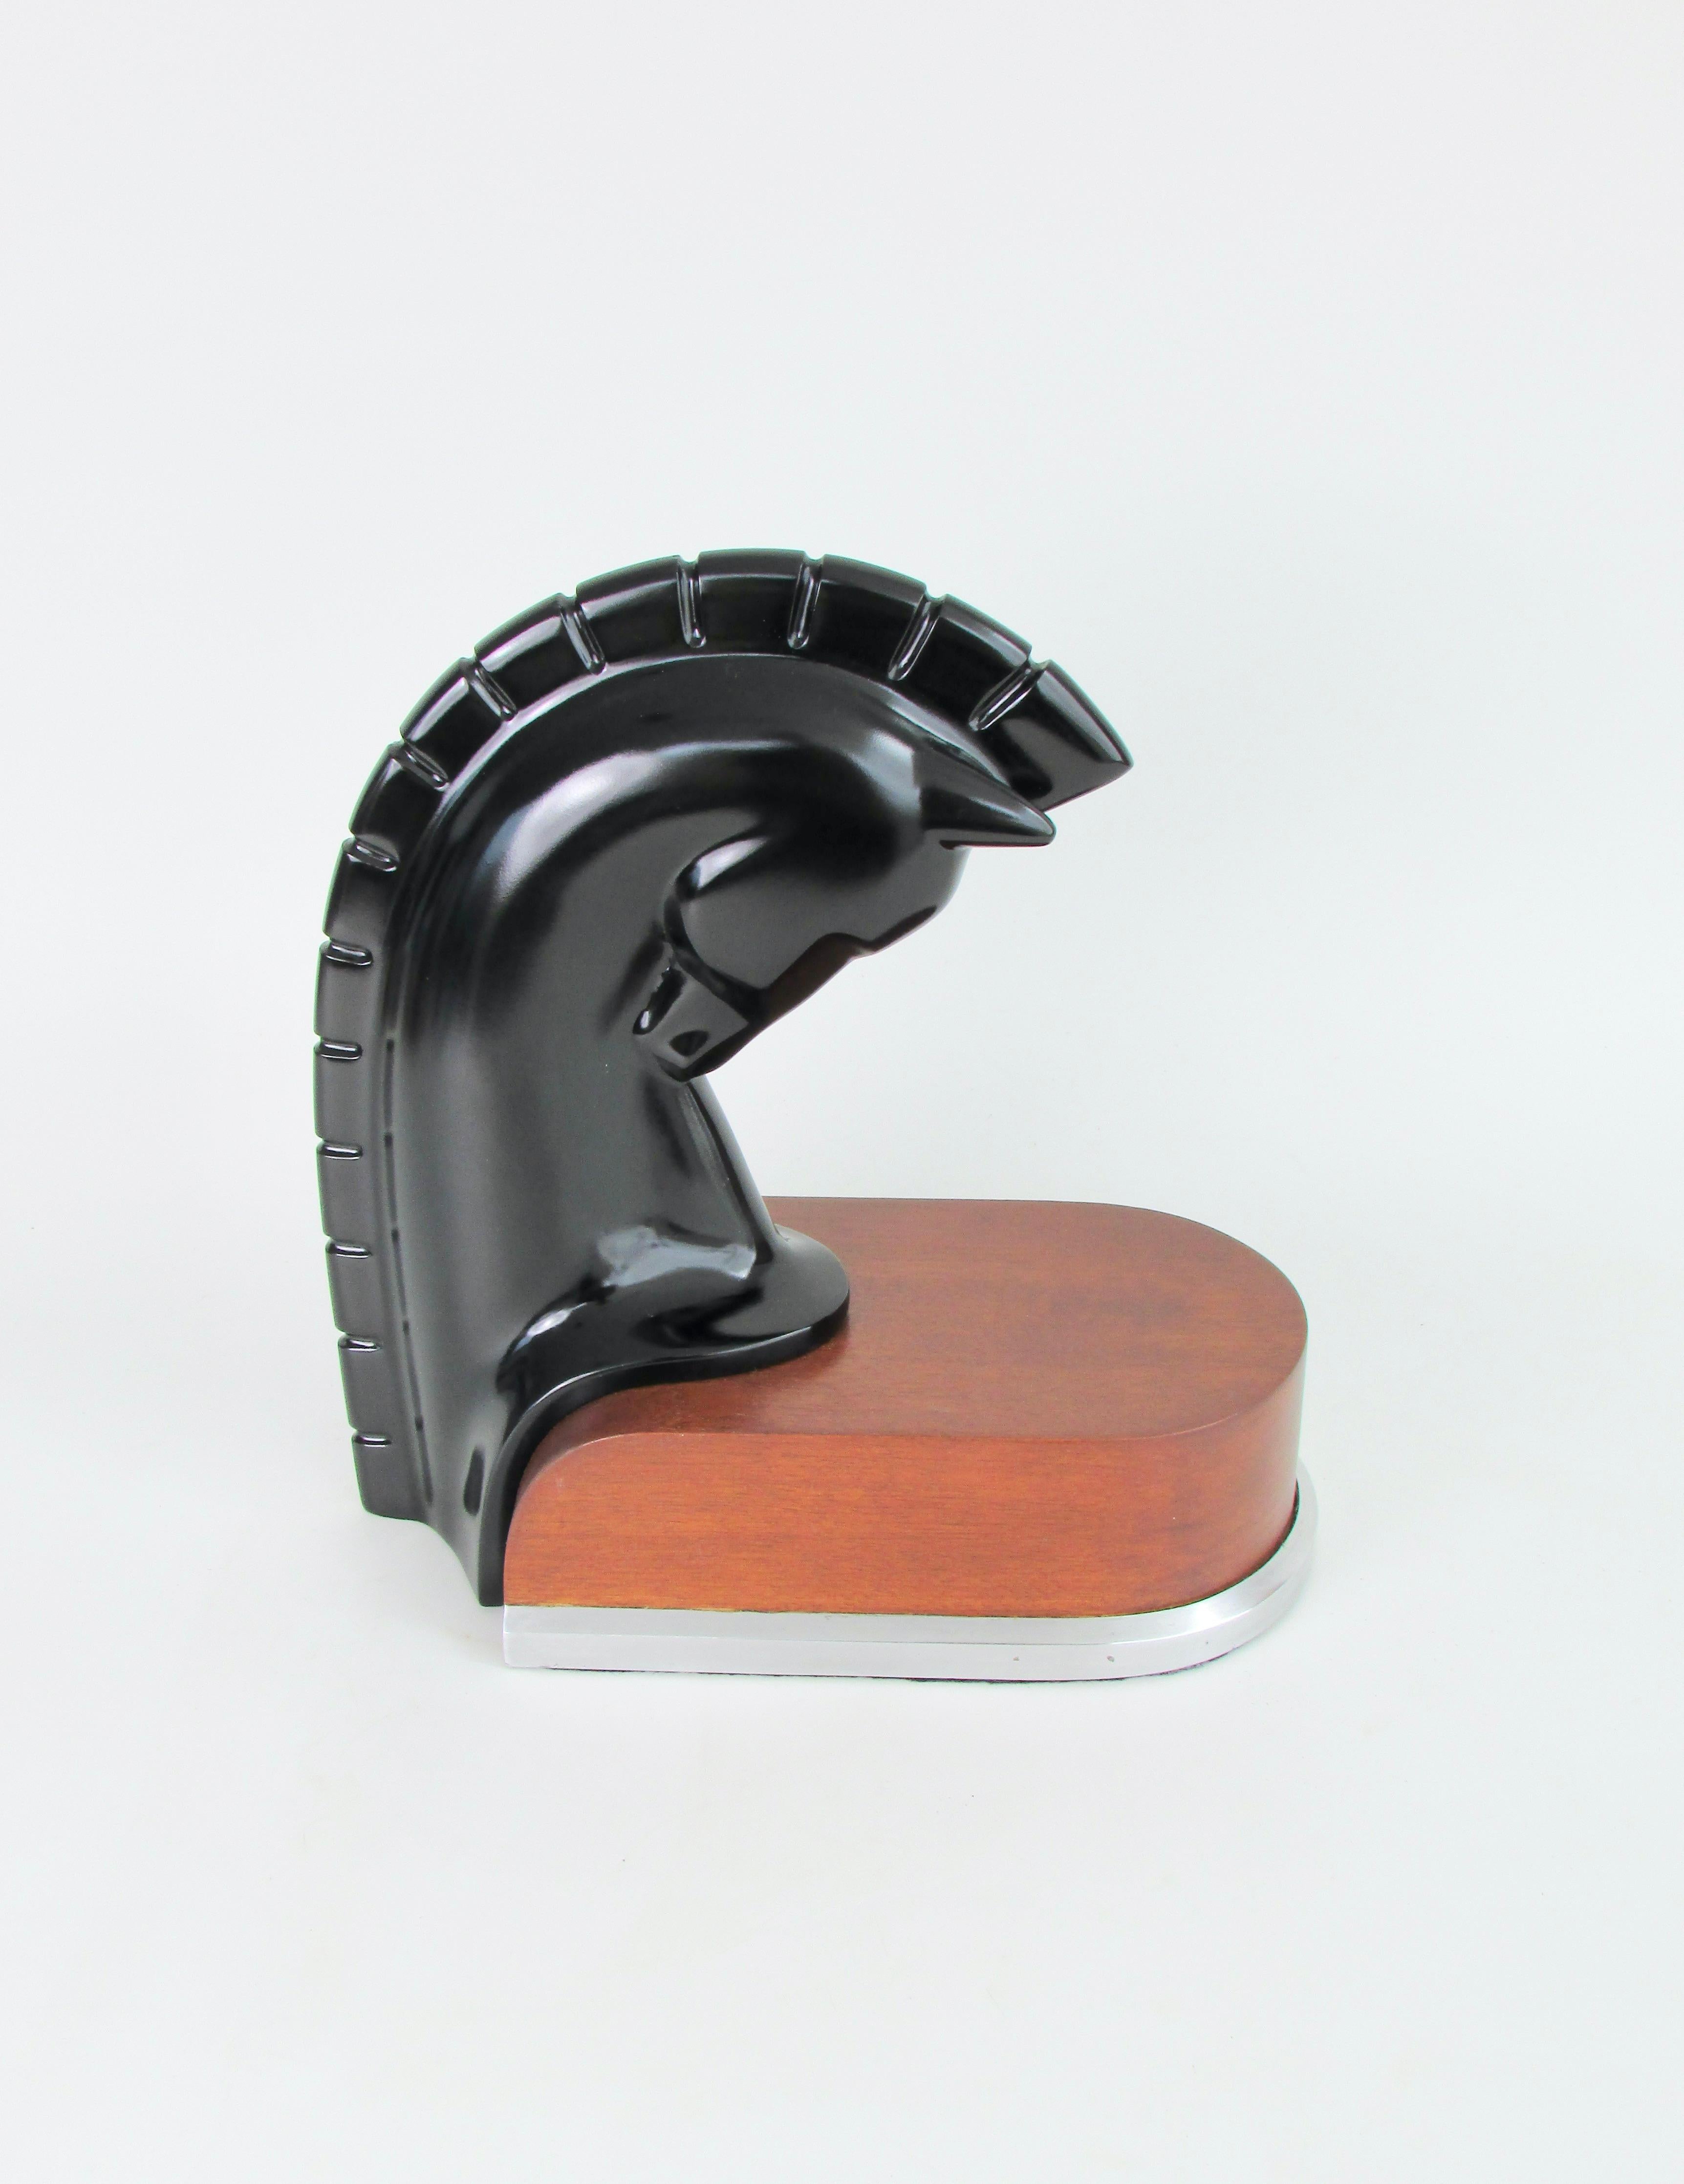 Art Deco era stylized horse head sculpture on streamlined wood and aluminum base For Sale 1